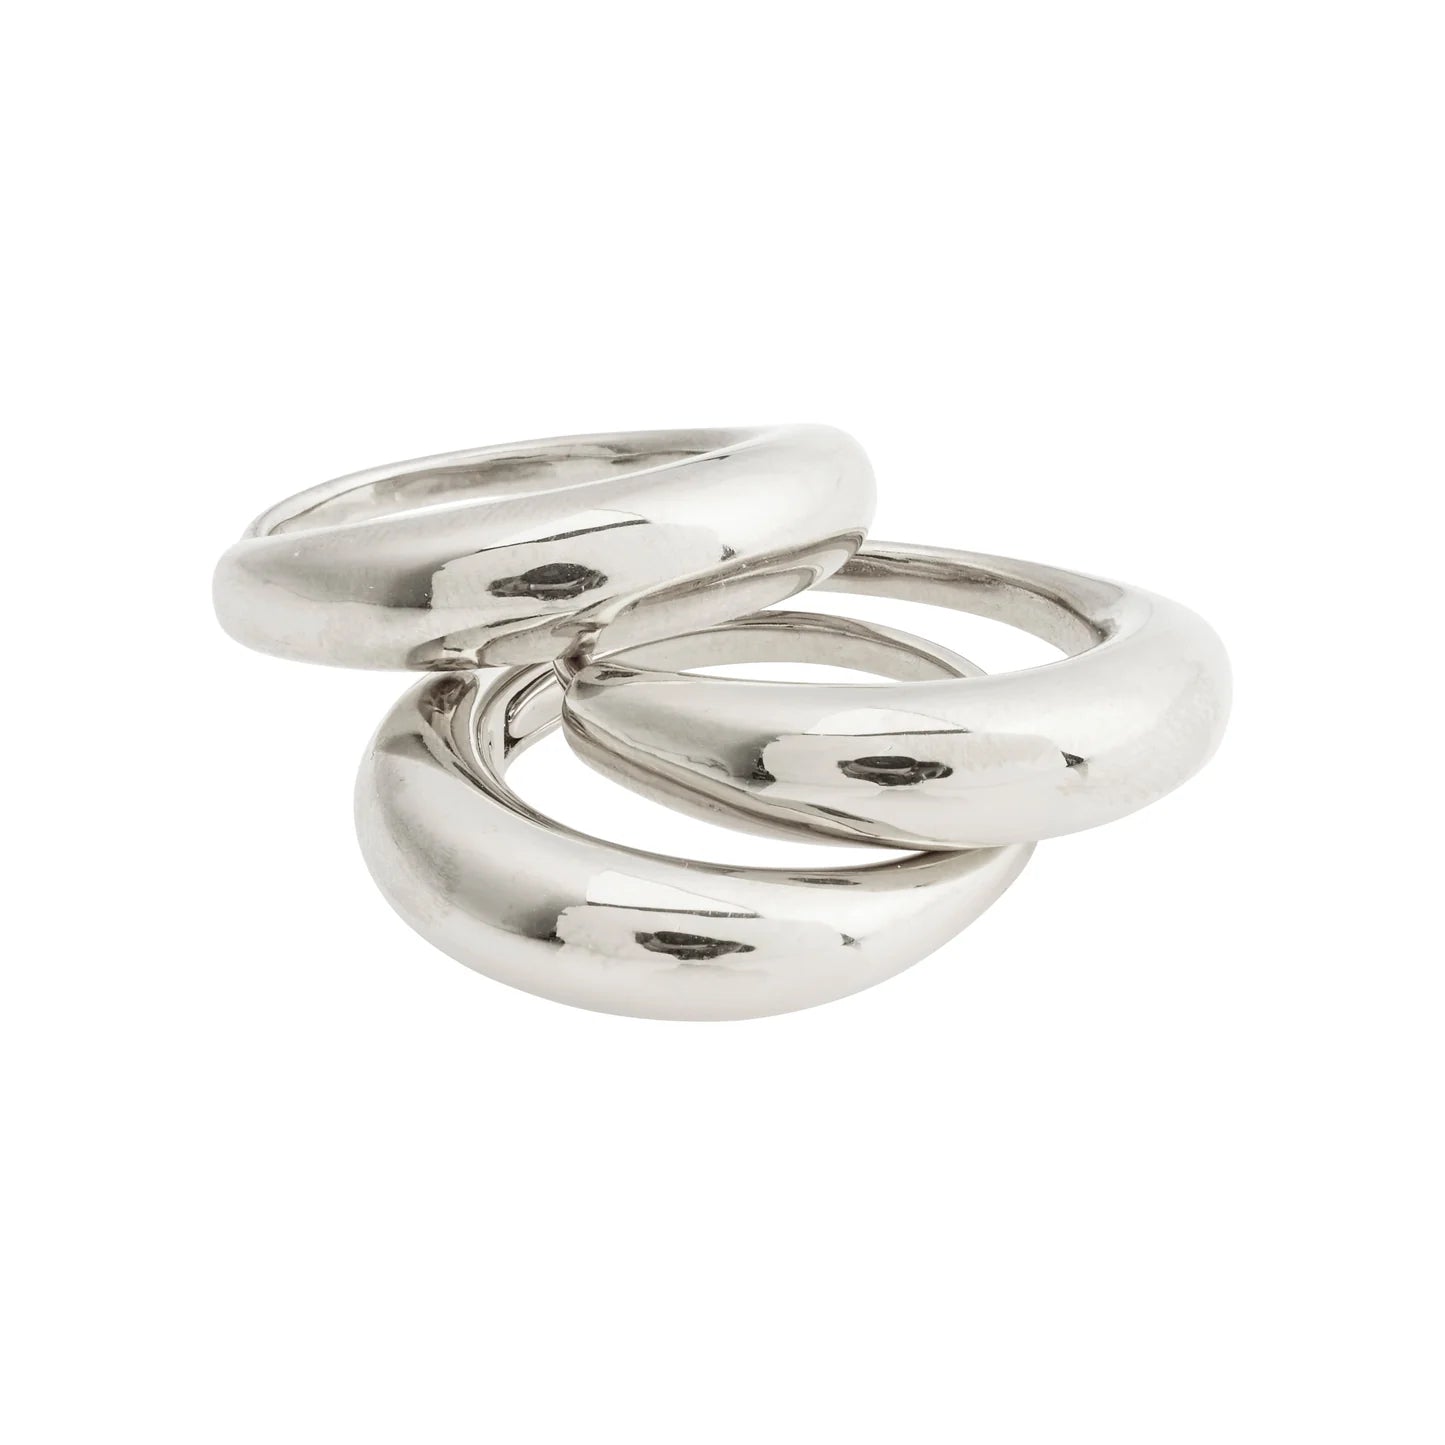 Be Stack Ring Set-Silver